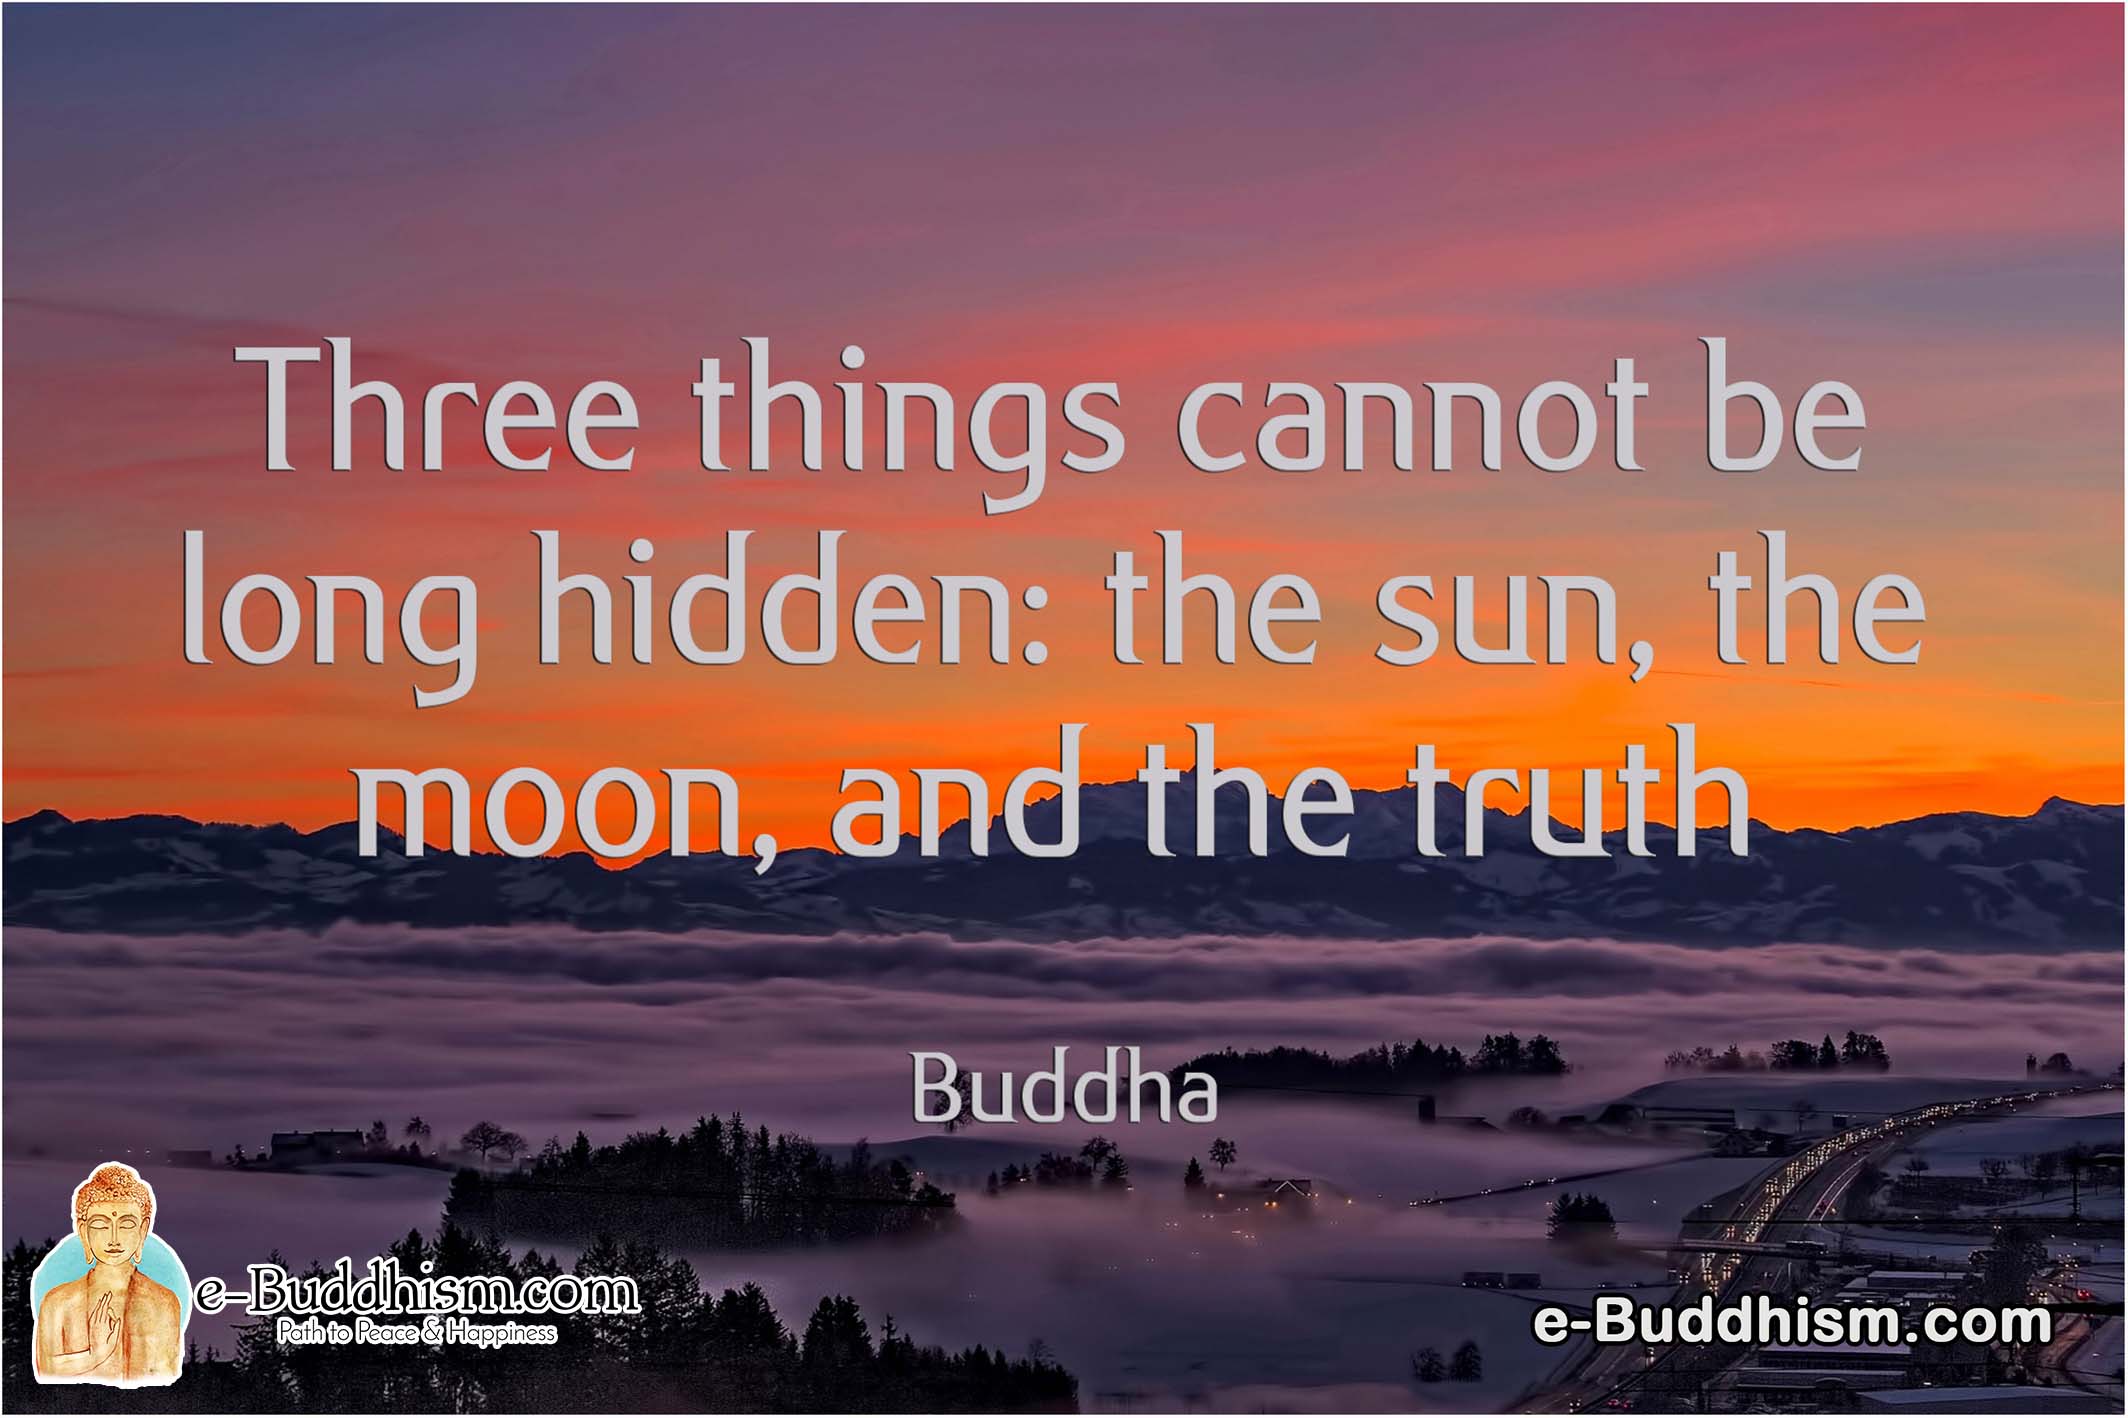 Three things cannot be long hidden: the sun, the moon, and the truth. -Buddha